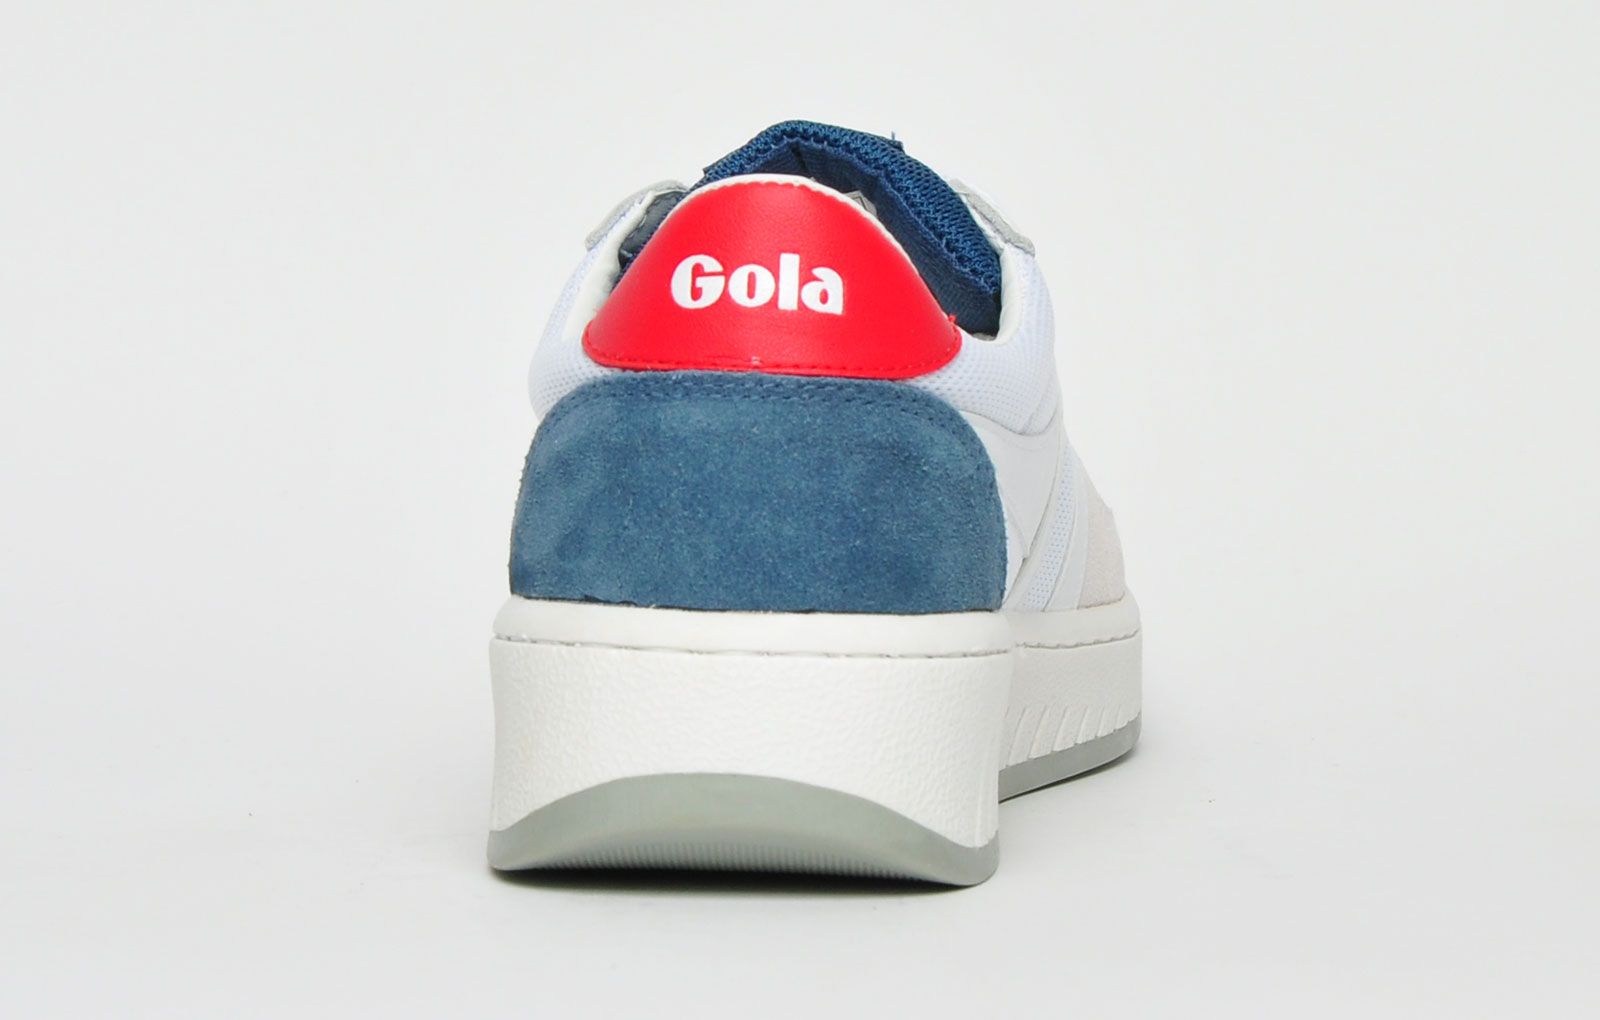 This Gola Classics Grandslam is an on-trend silhouette paying homage to Gola’s British roots taking the classic court design and adding mesh panels with a contrasting vintage styled outsole giving a fresh and modern look that you’d expect from Gola. <p>Iconic Gola signature details finish these Grandslam trainers in style.</p> <p>- Textile/ leather upper</p> <p>- On-trend retro styling</p> <p>- Secure lace up system</p> <p>- Vintage styled outsole</p> <p>- Gola Classics branding throughout</p>